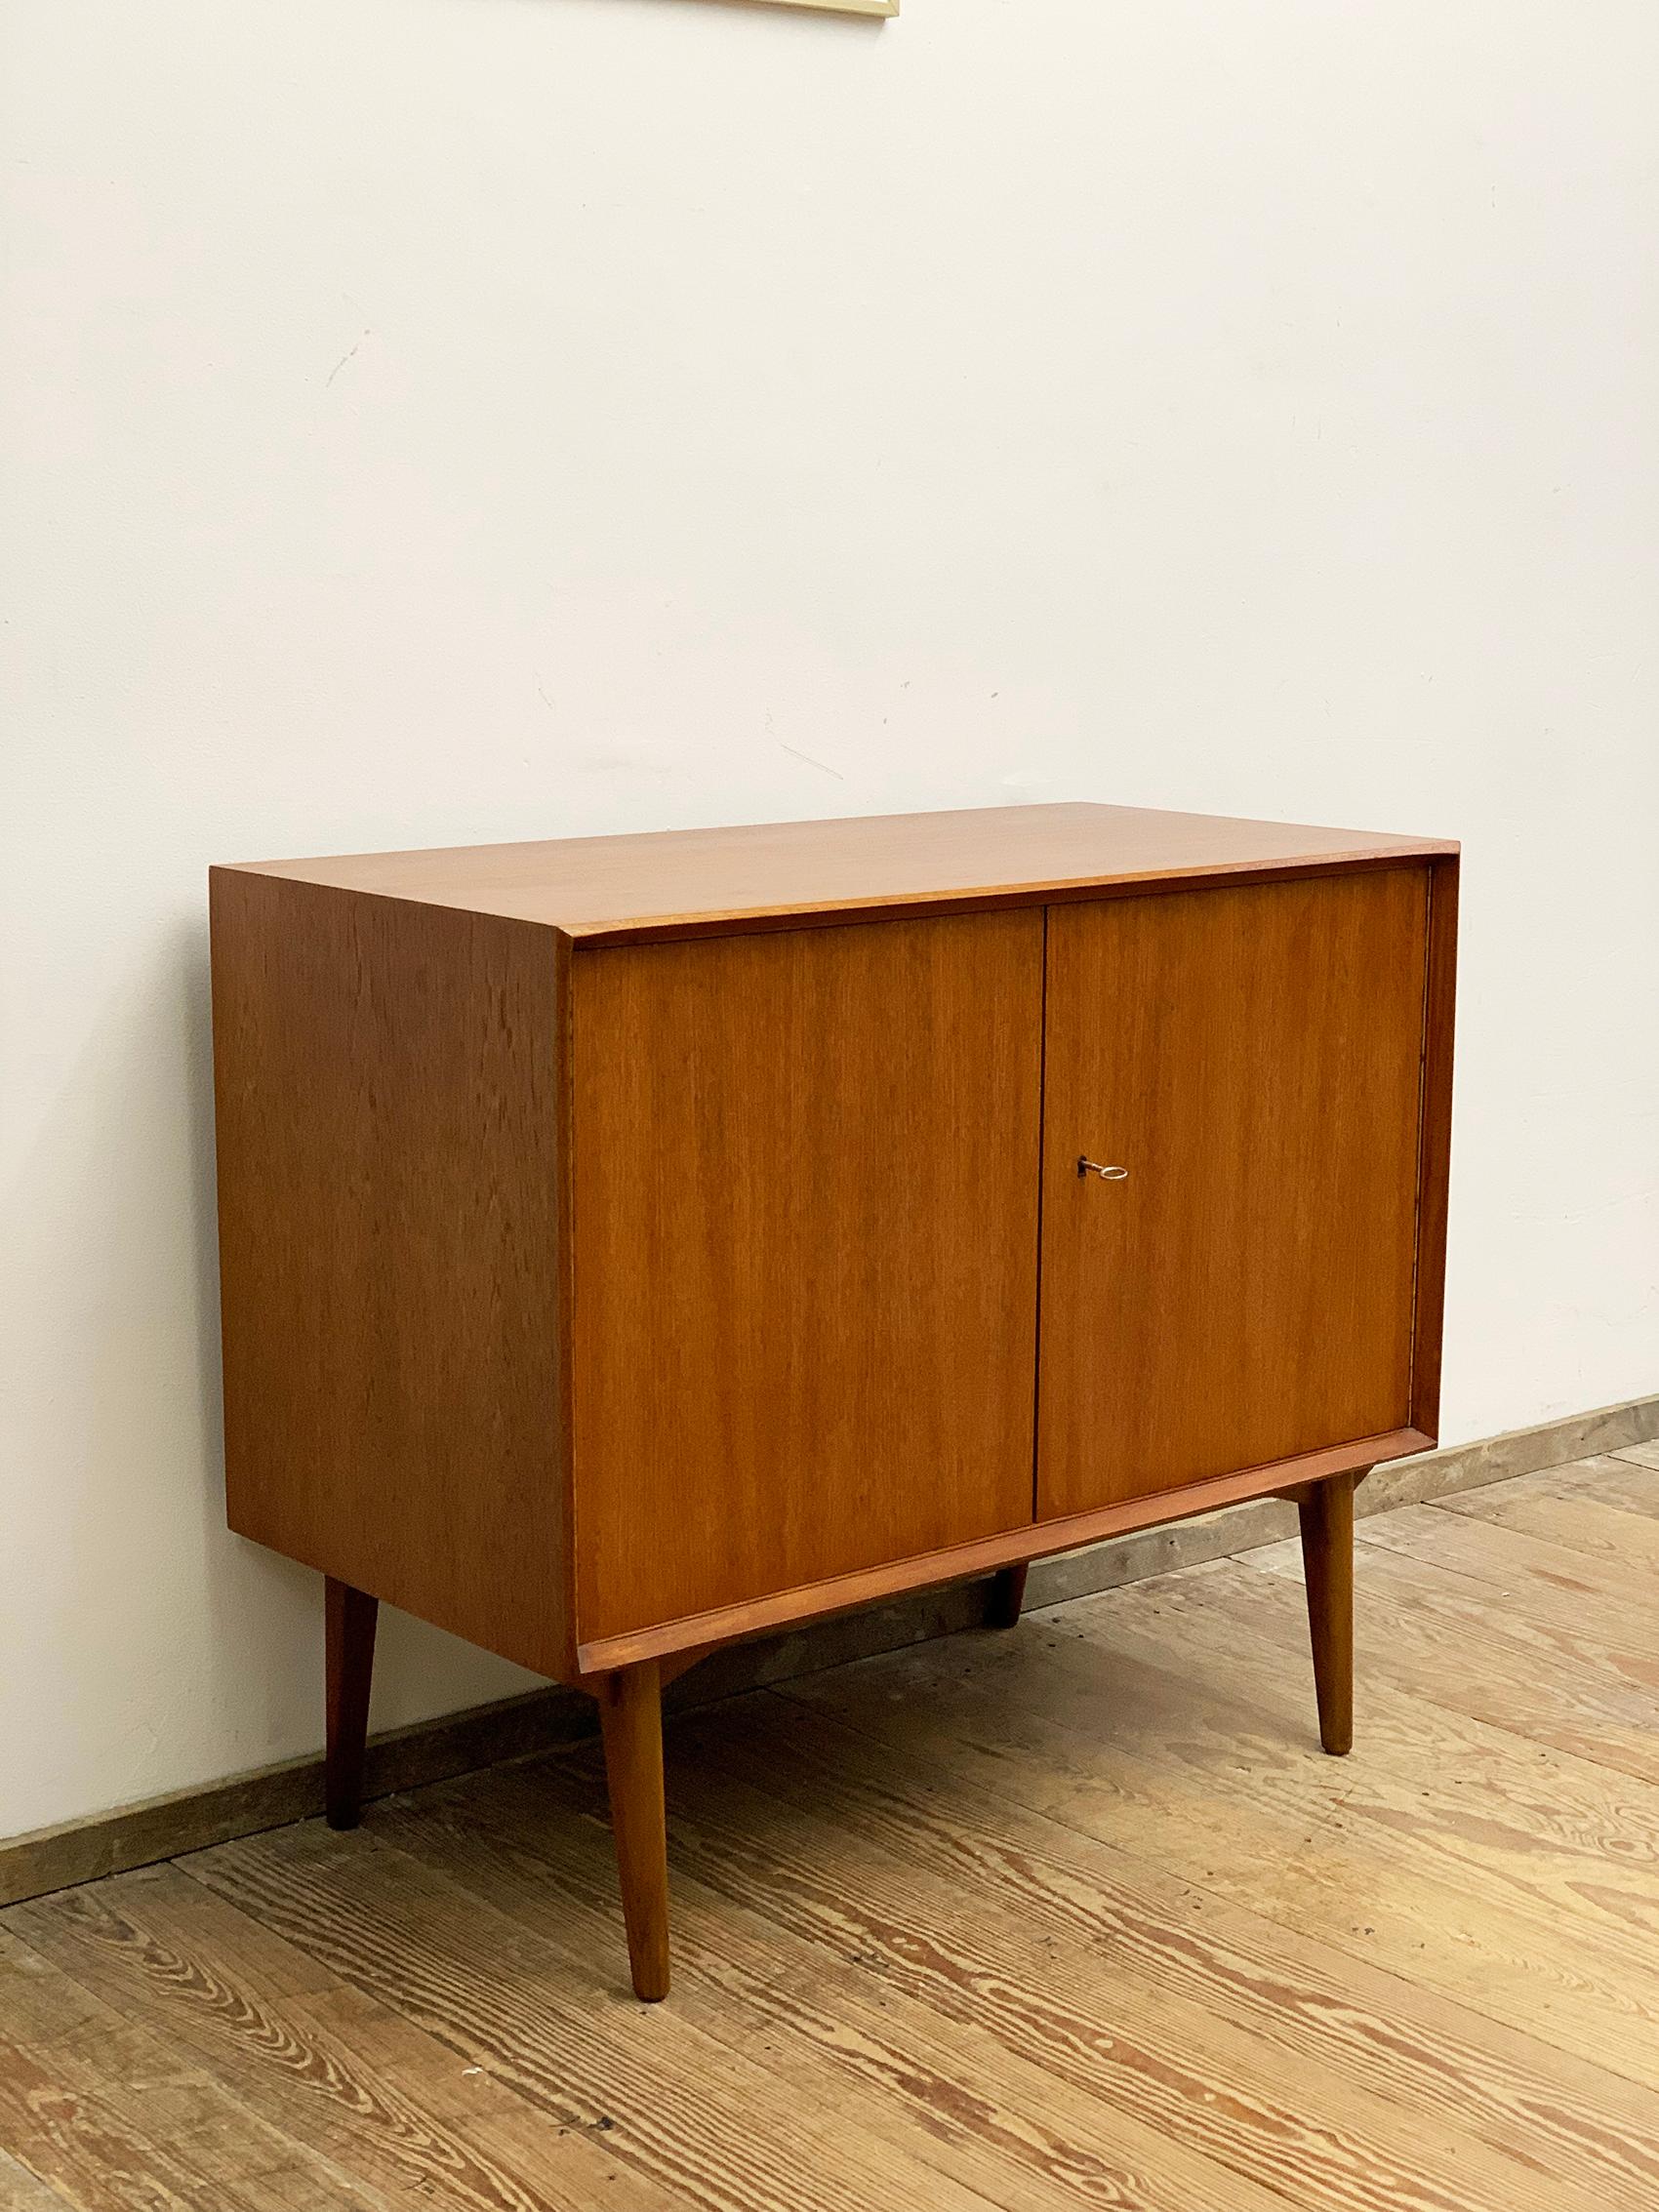 Hand-Carved Small Mid-Century Sideboard in Teak by Rex Raab for Wilhelm Renz, Germany, 1960s For Sale